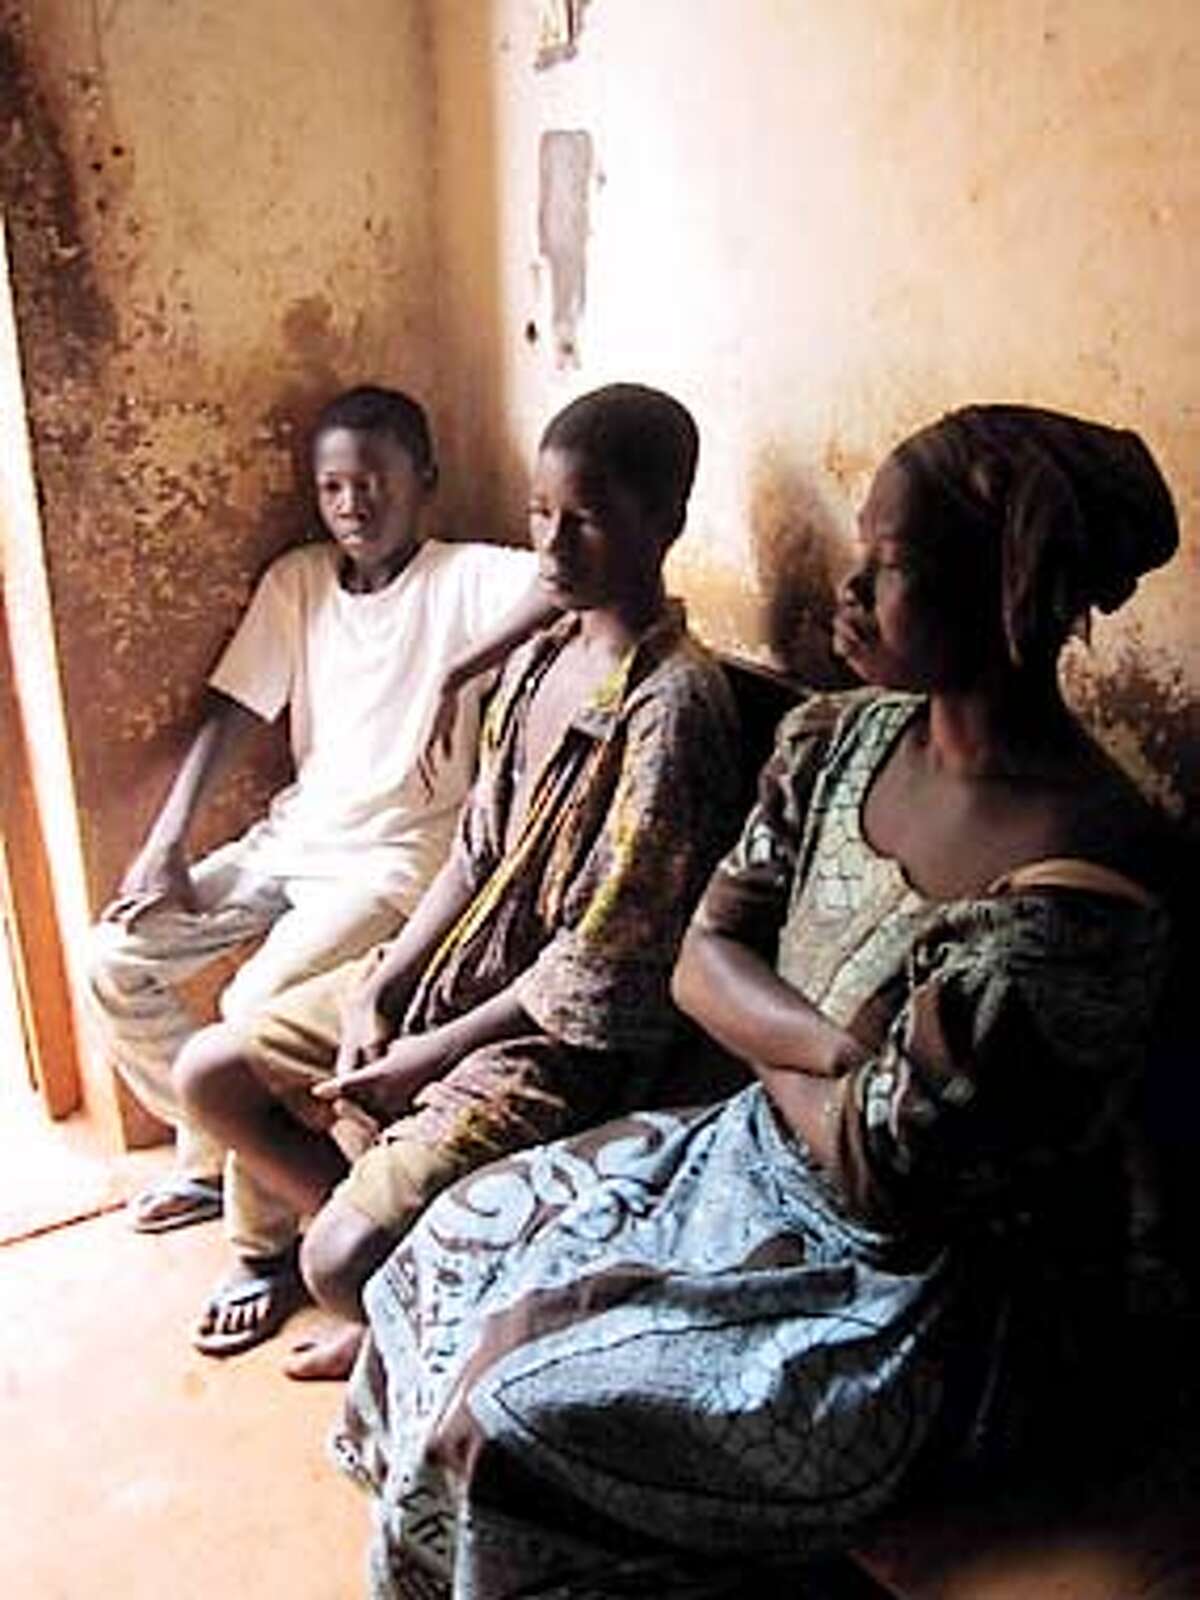 Blaise Damagoa and other accused "witches" wait to be questioned at the police station in Bangui, Central African Republic. Photo by Lucy Jones, special to the Chronicle